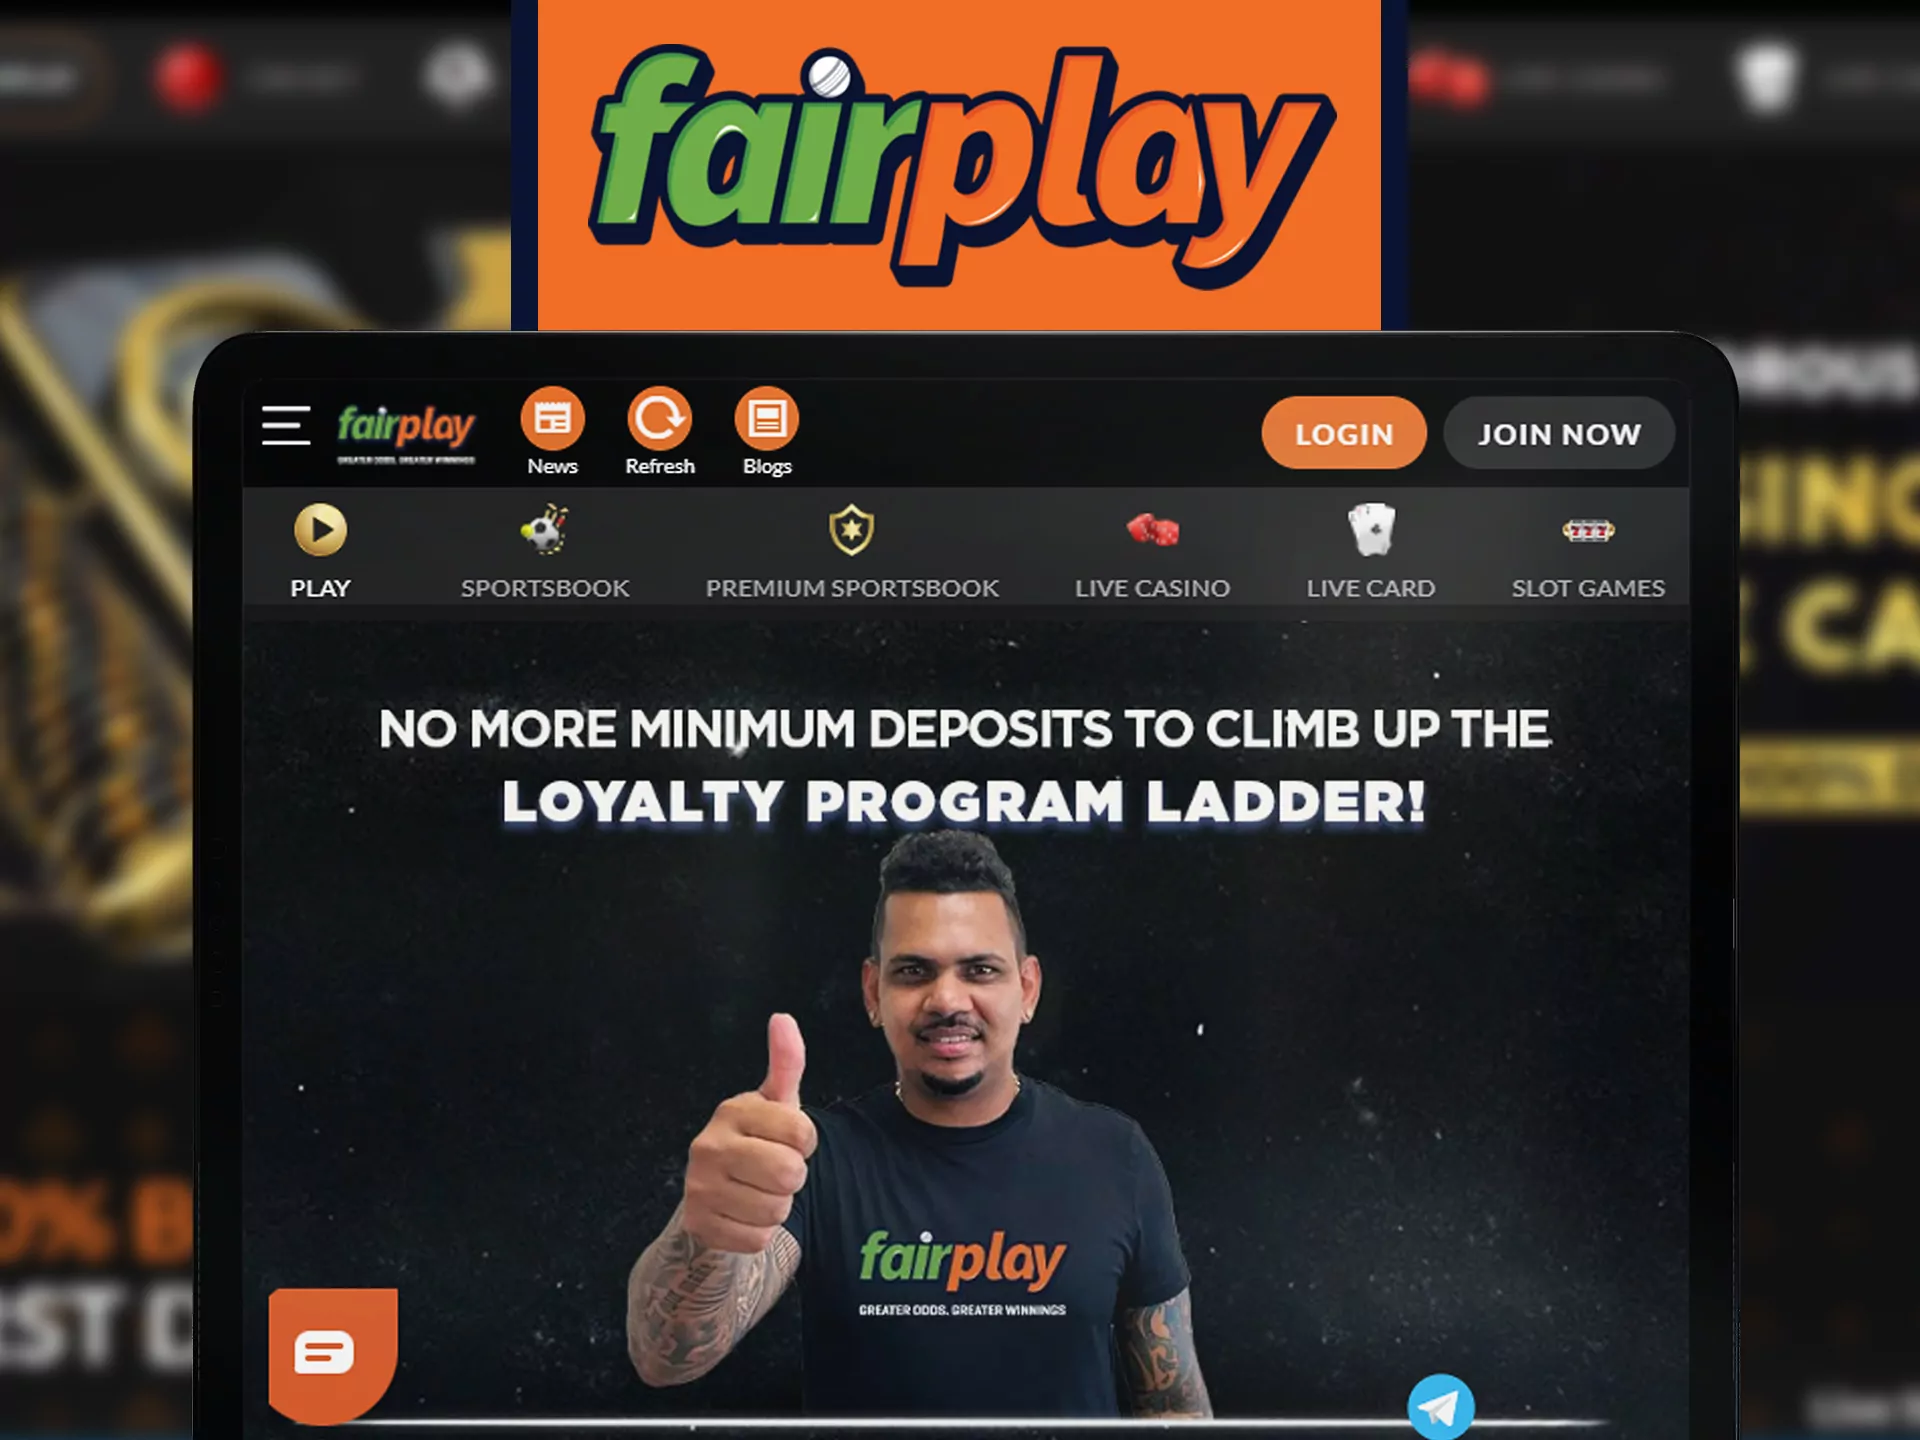 You can use a web version of Fairplay on your smartphone.